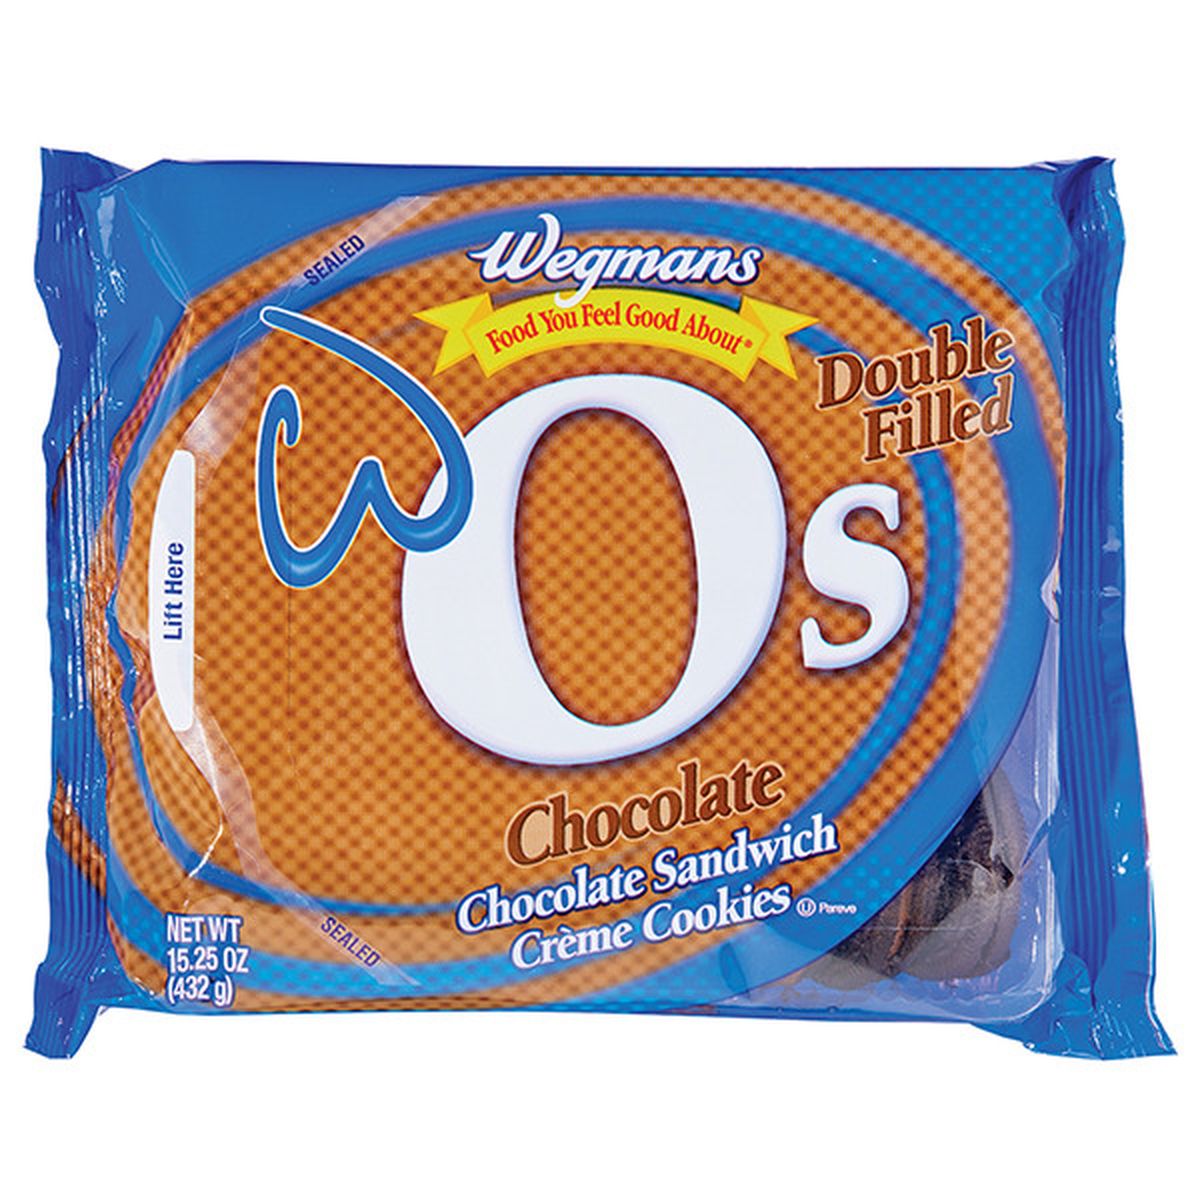 Calories in Wegmans Double Filled Chocolate W O's: CrÃ¨me-Filled Chocolate Sandwich Cookies